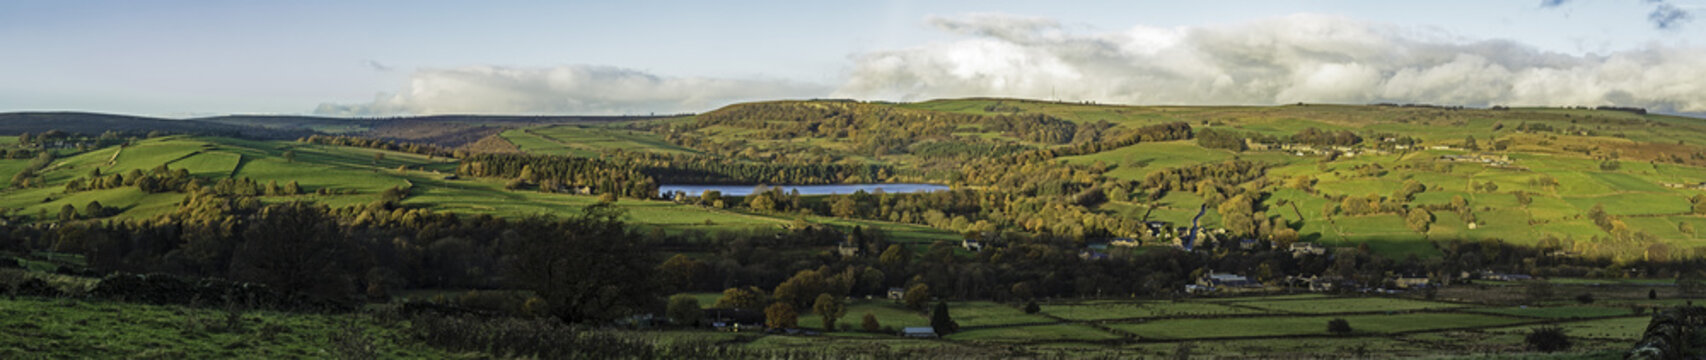 Panorama Of Yorkshire Countryside At Bradfield, Sheffield Looking Towards Agden Reservoir